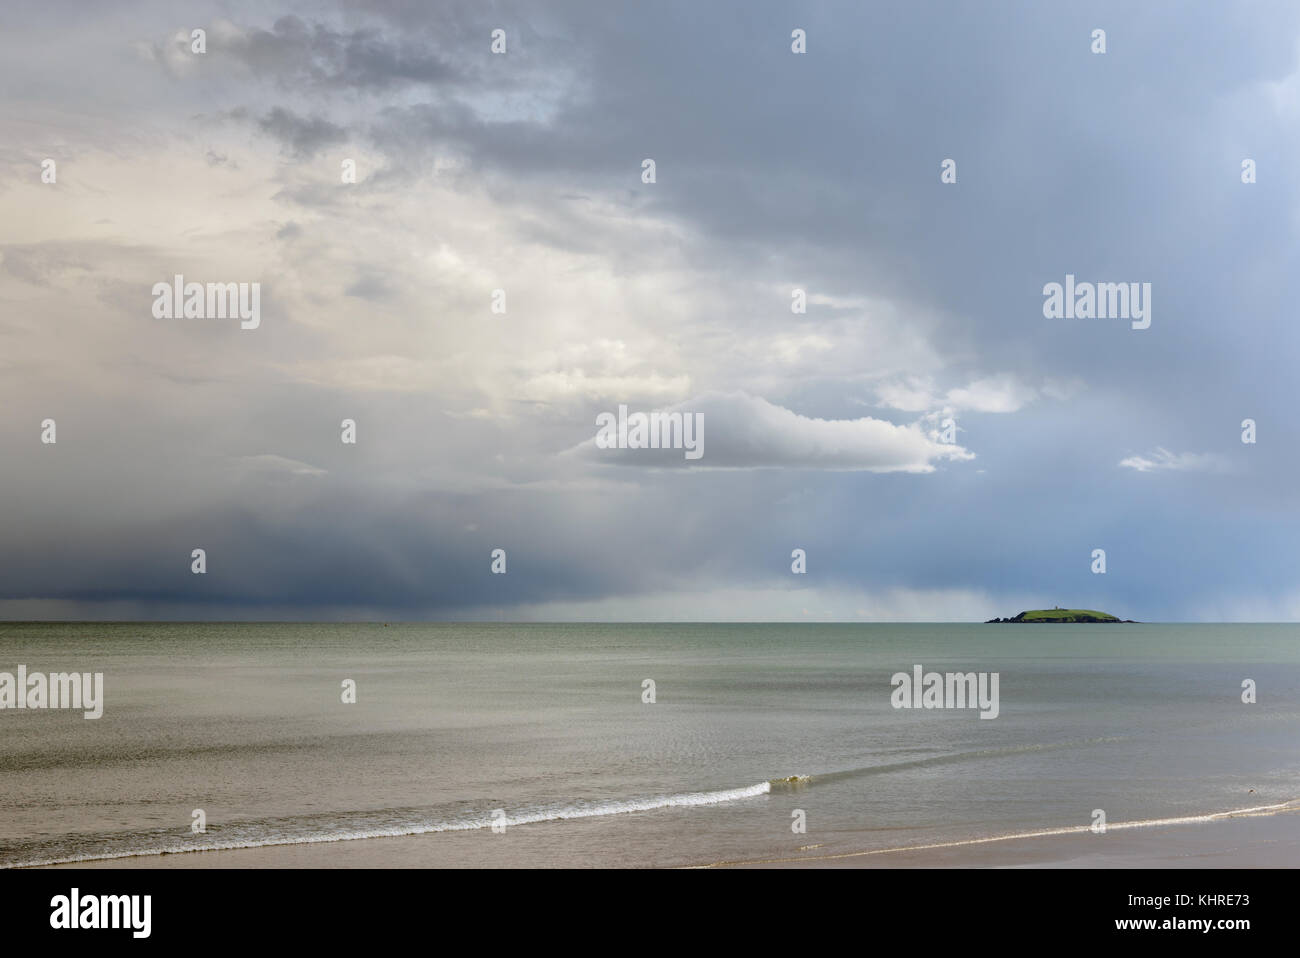 Capel island in Scottish Sea as seen from Youghal strand, County Cork, Ireland Stock Photo